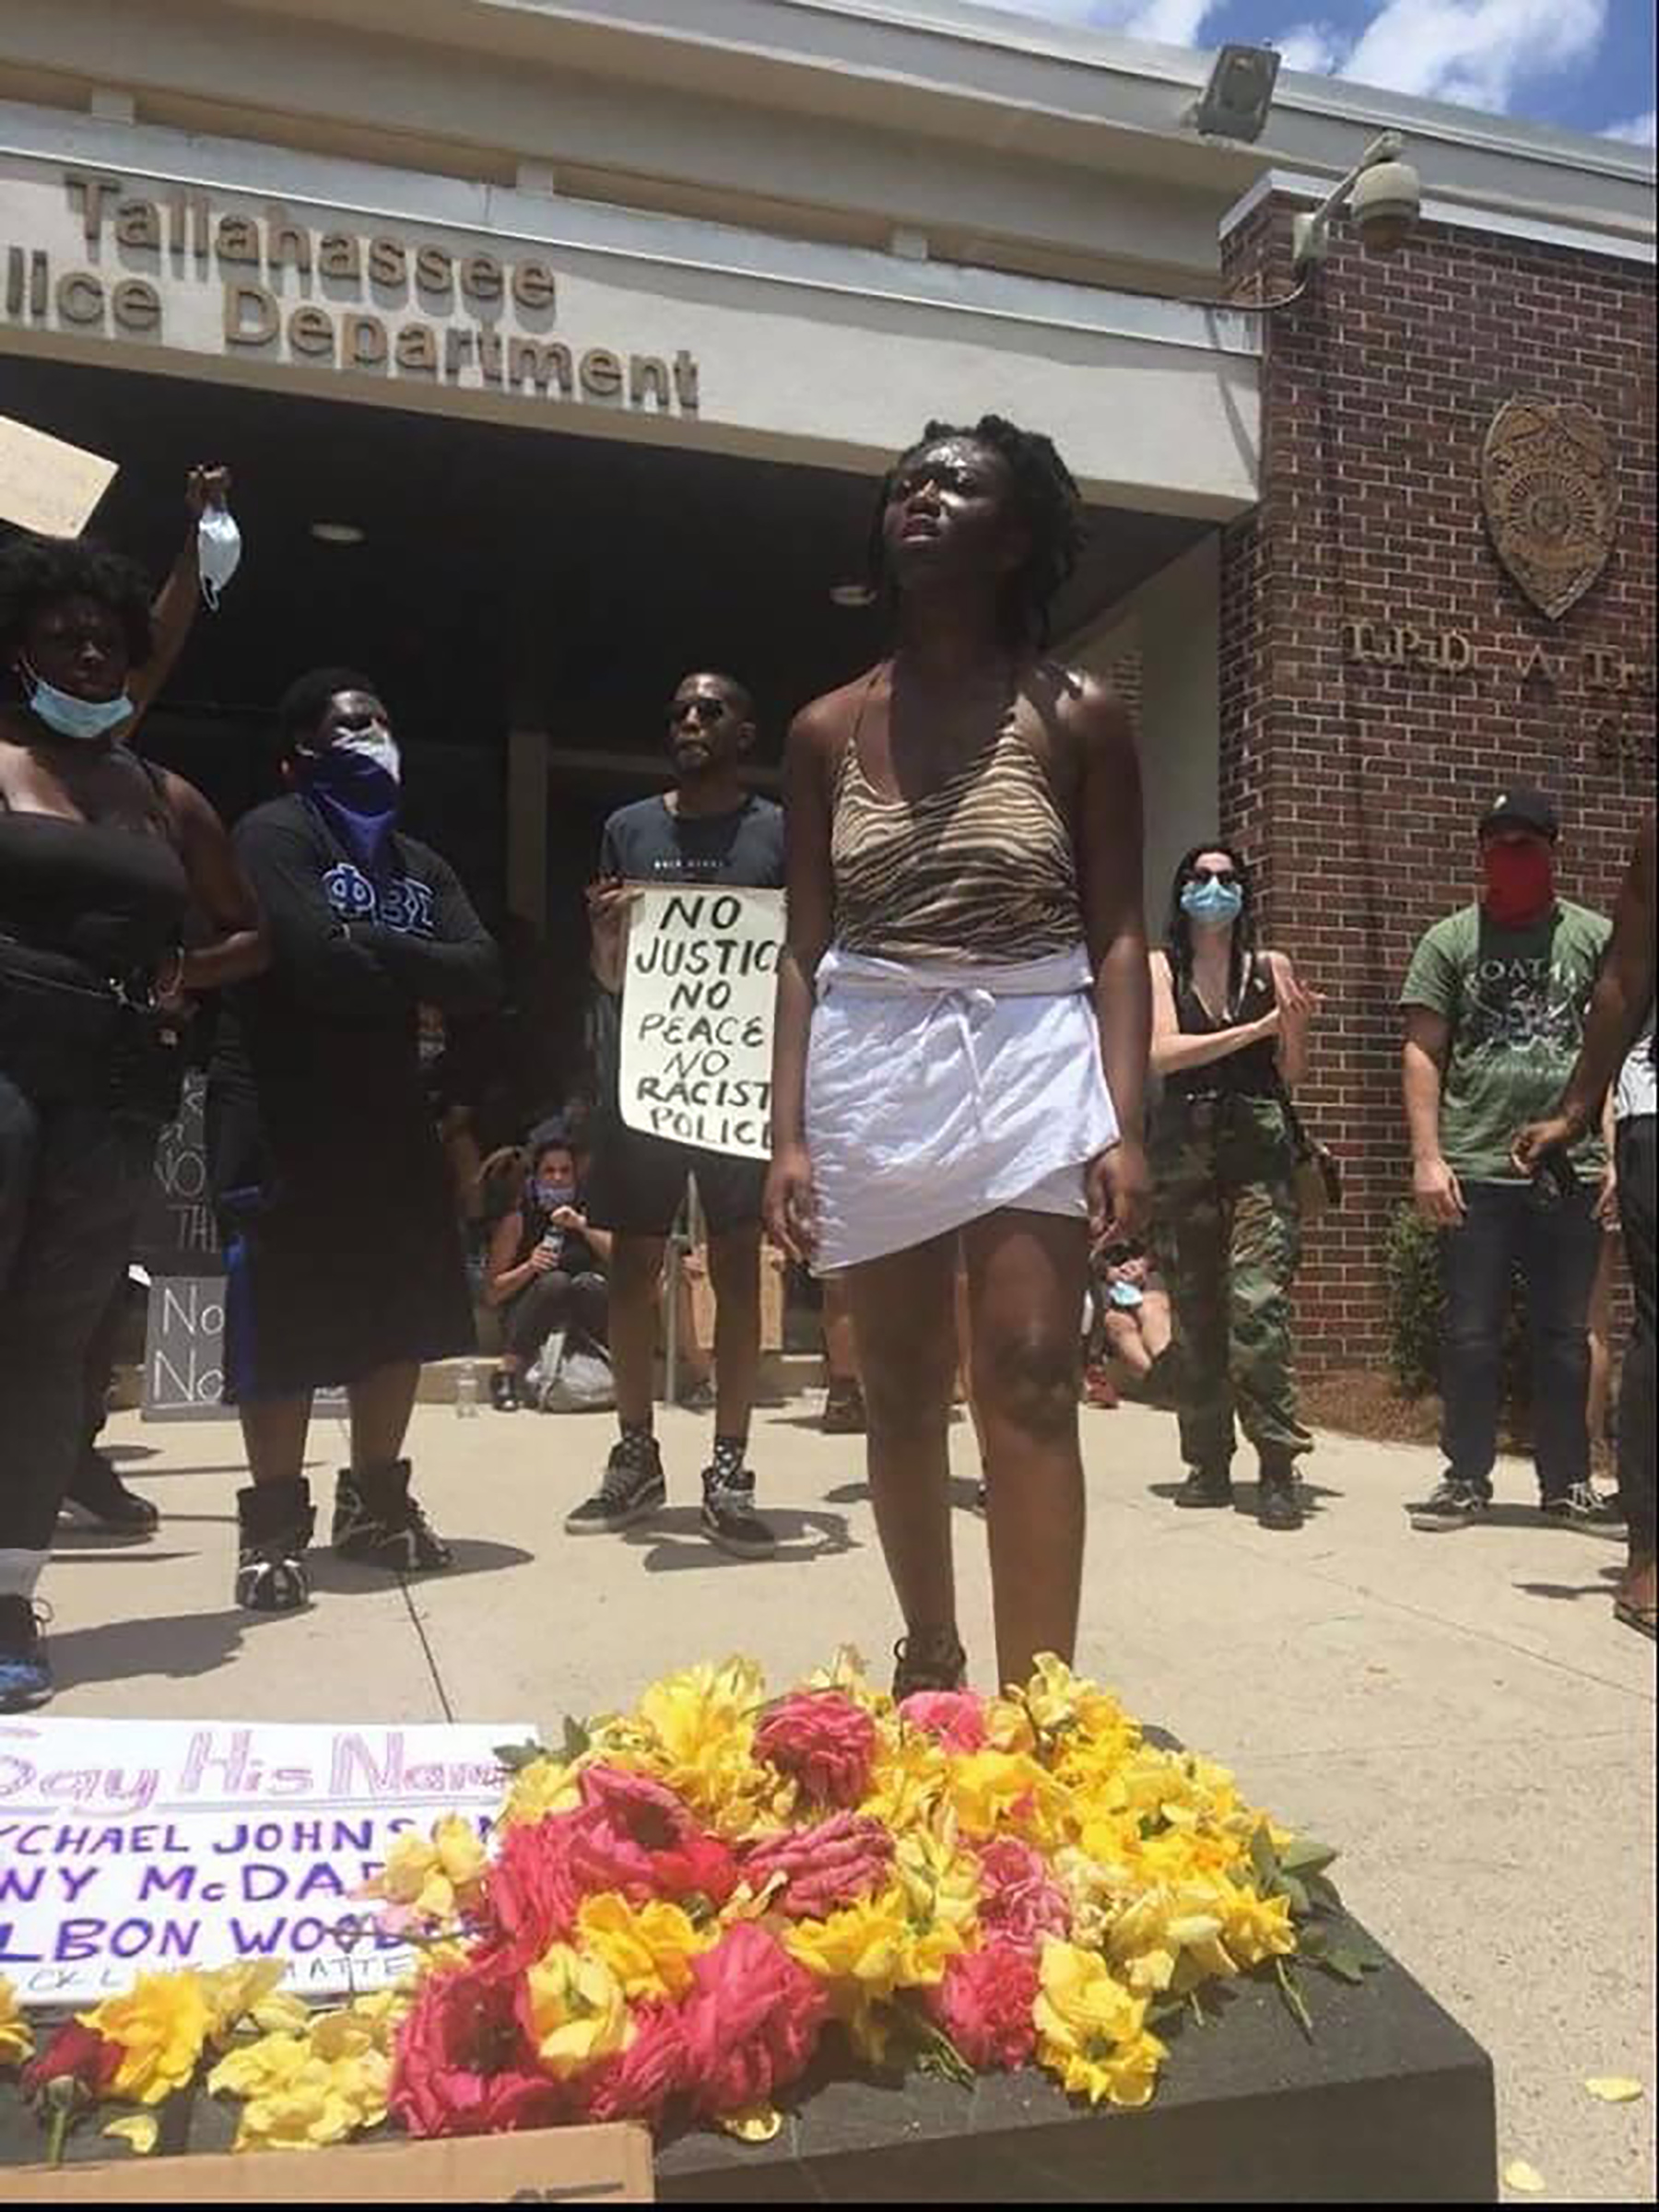 Nada Hassanein—Tallahassee Democrat/REUTERS (Black Lives Matter demonstrator Oluwatoyin Salau, pictured during a protest at Tallahassee Police Department, has been missing since June 6)